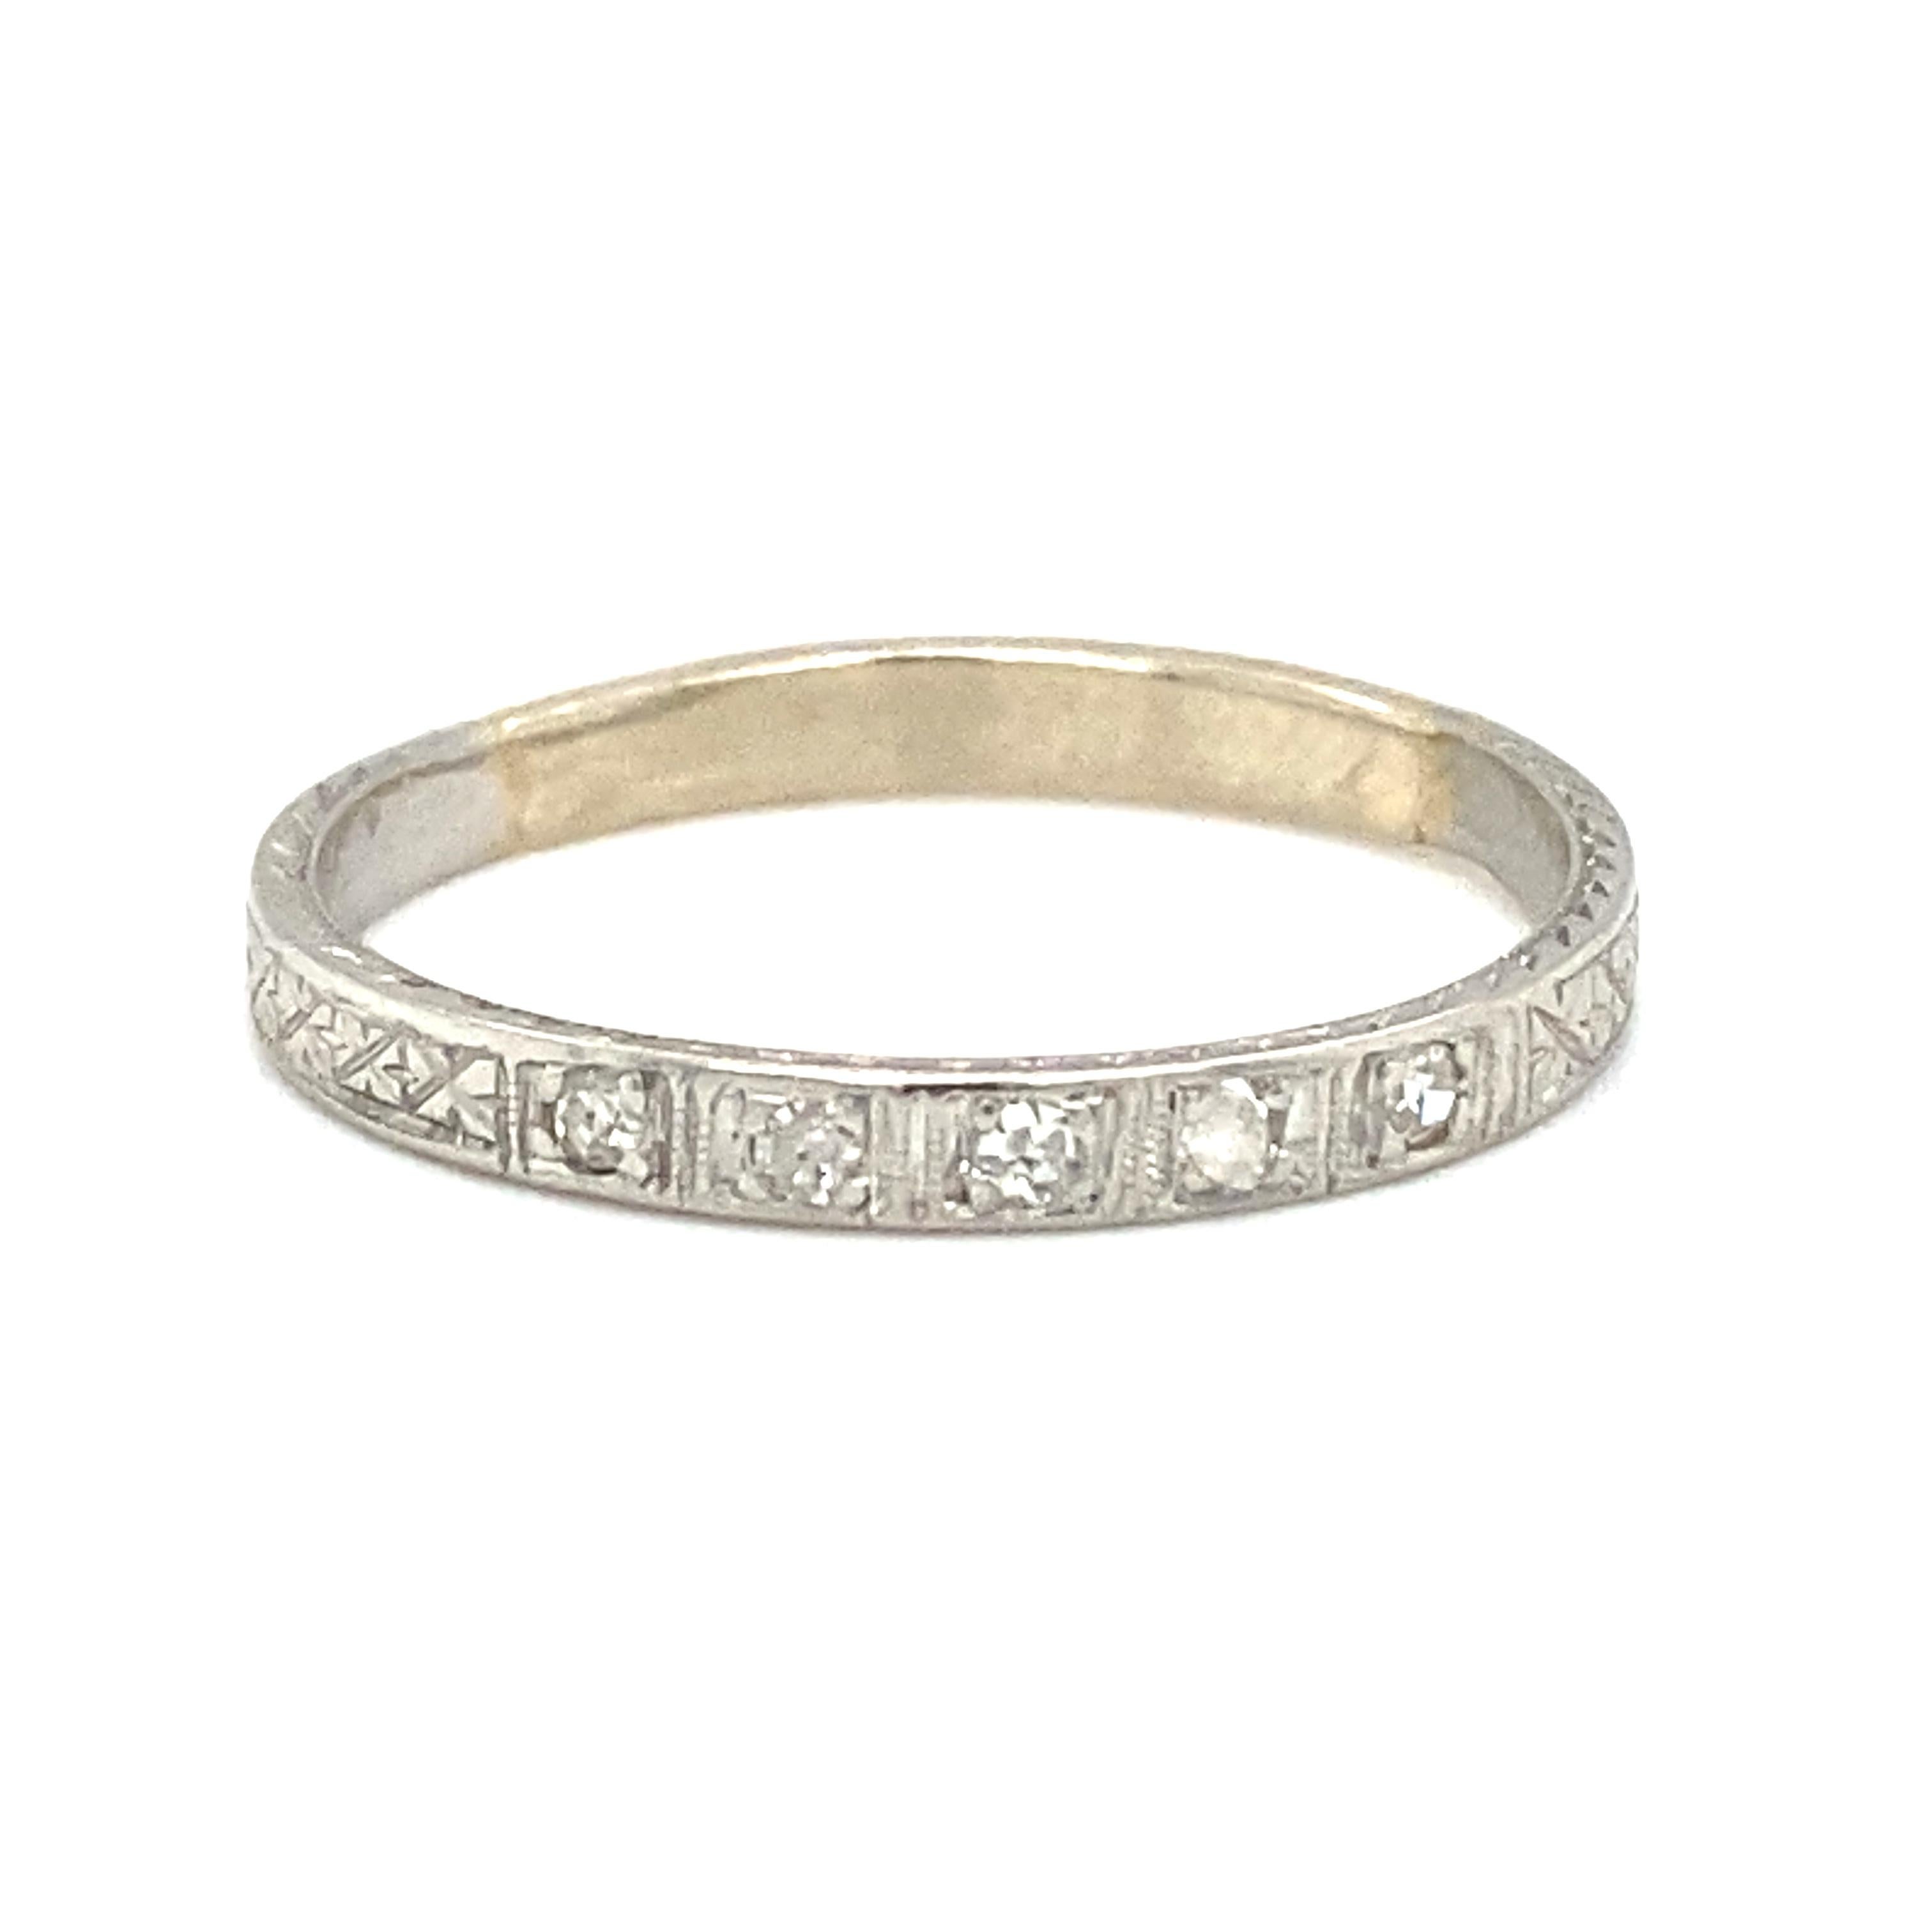 Item Details: This antique wedding band has five accent diamonds that are bezel set and is inscribed with the initials JEH. It has beautiful etching design work featured on the outer part of the ring as well as around the diamonds. 

Circa: